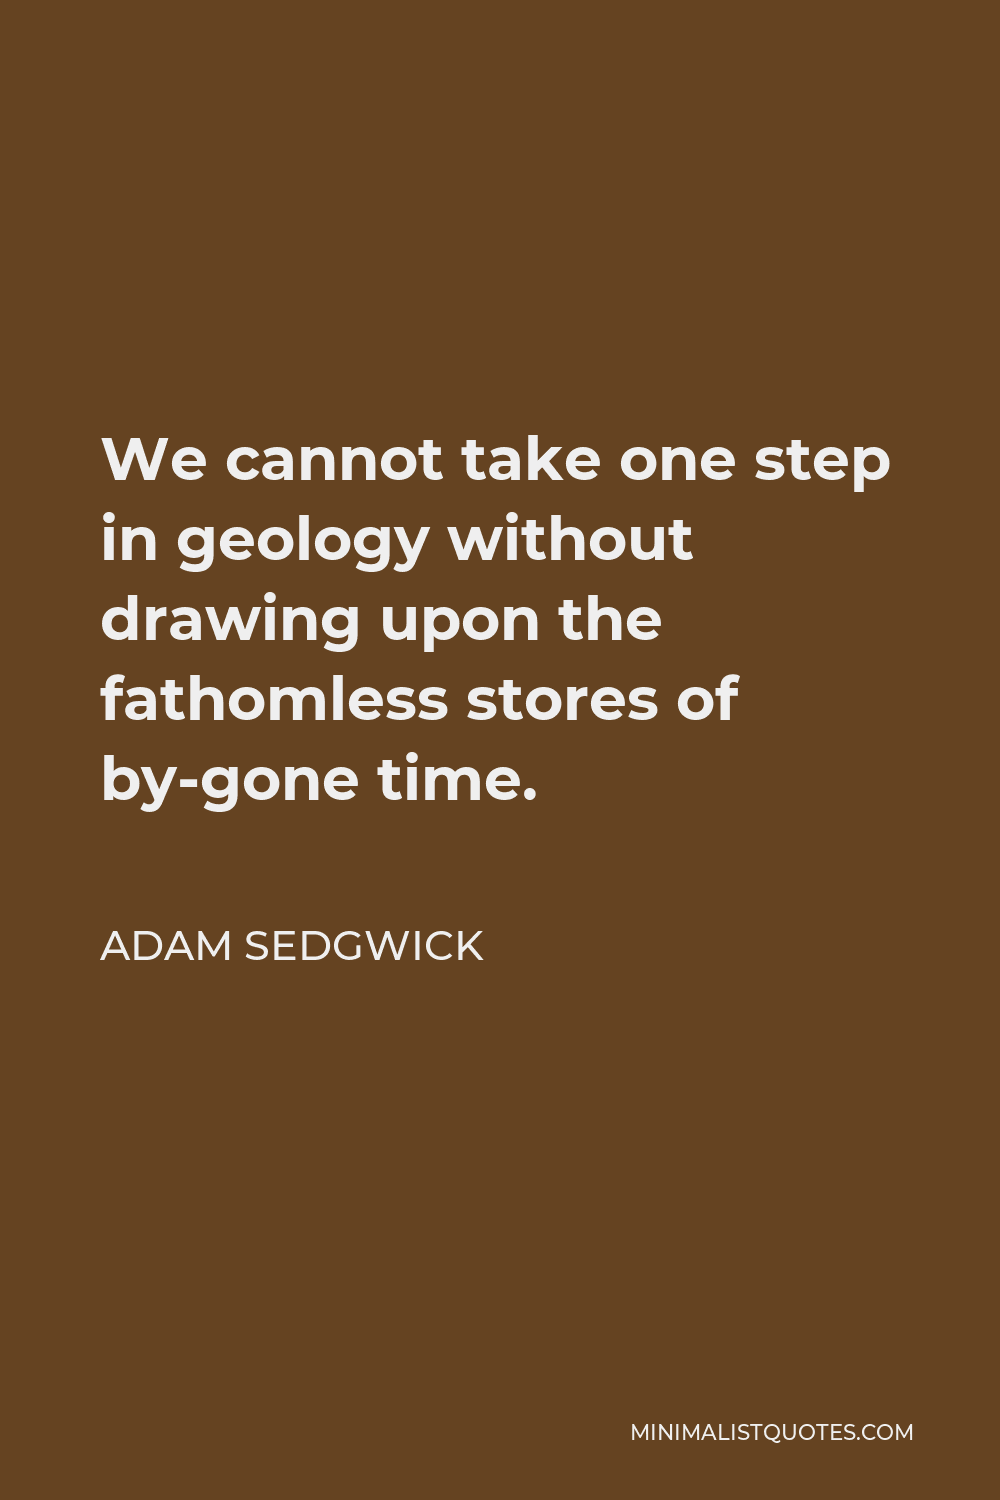 Adam Sedgwick Quote - We cannot take one step in geology without drawing upon the fathomless stores of by-gone time.